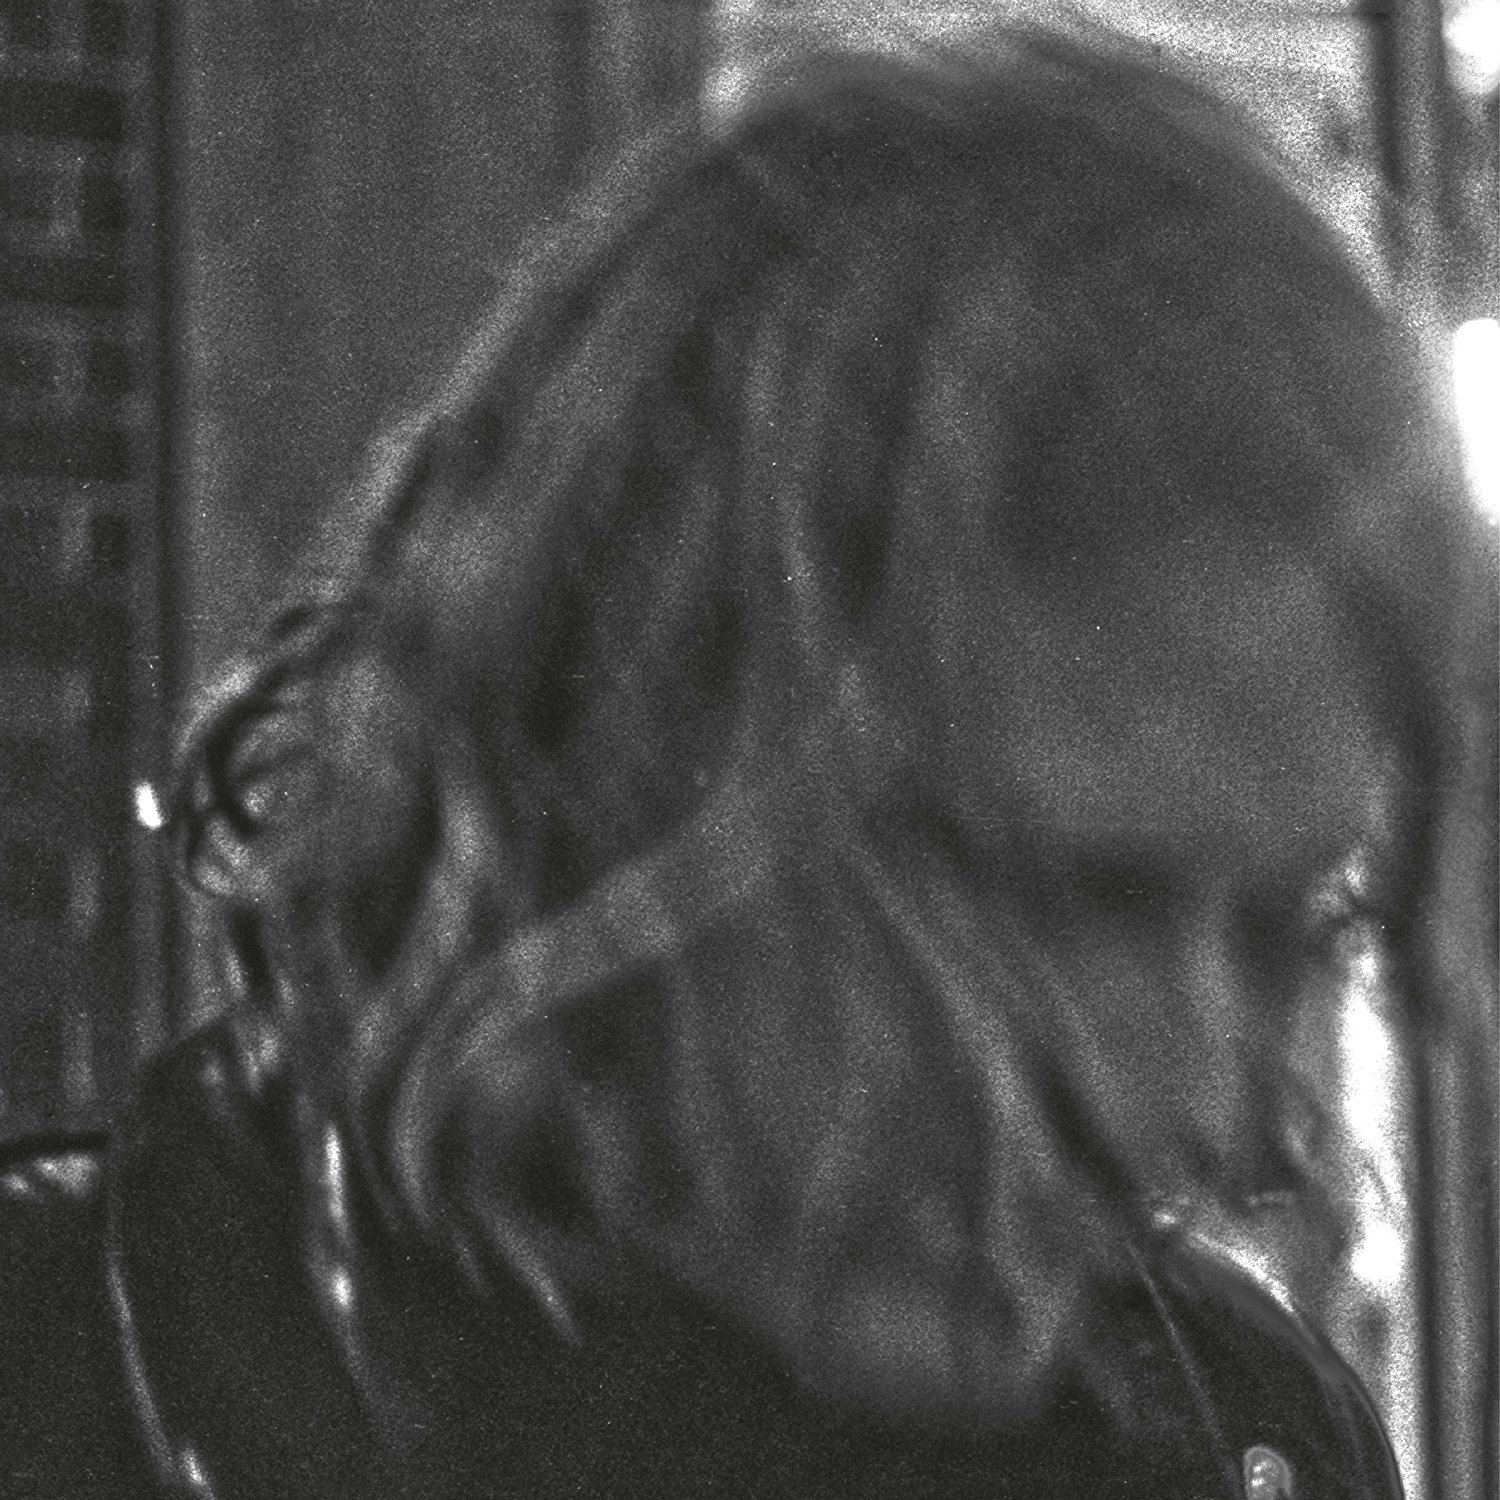 Ty Segall: Ty Segall